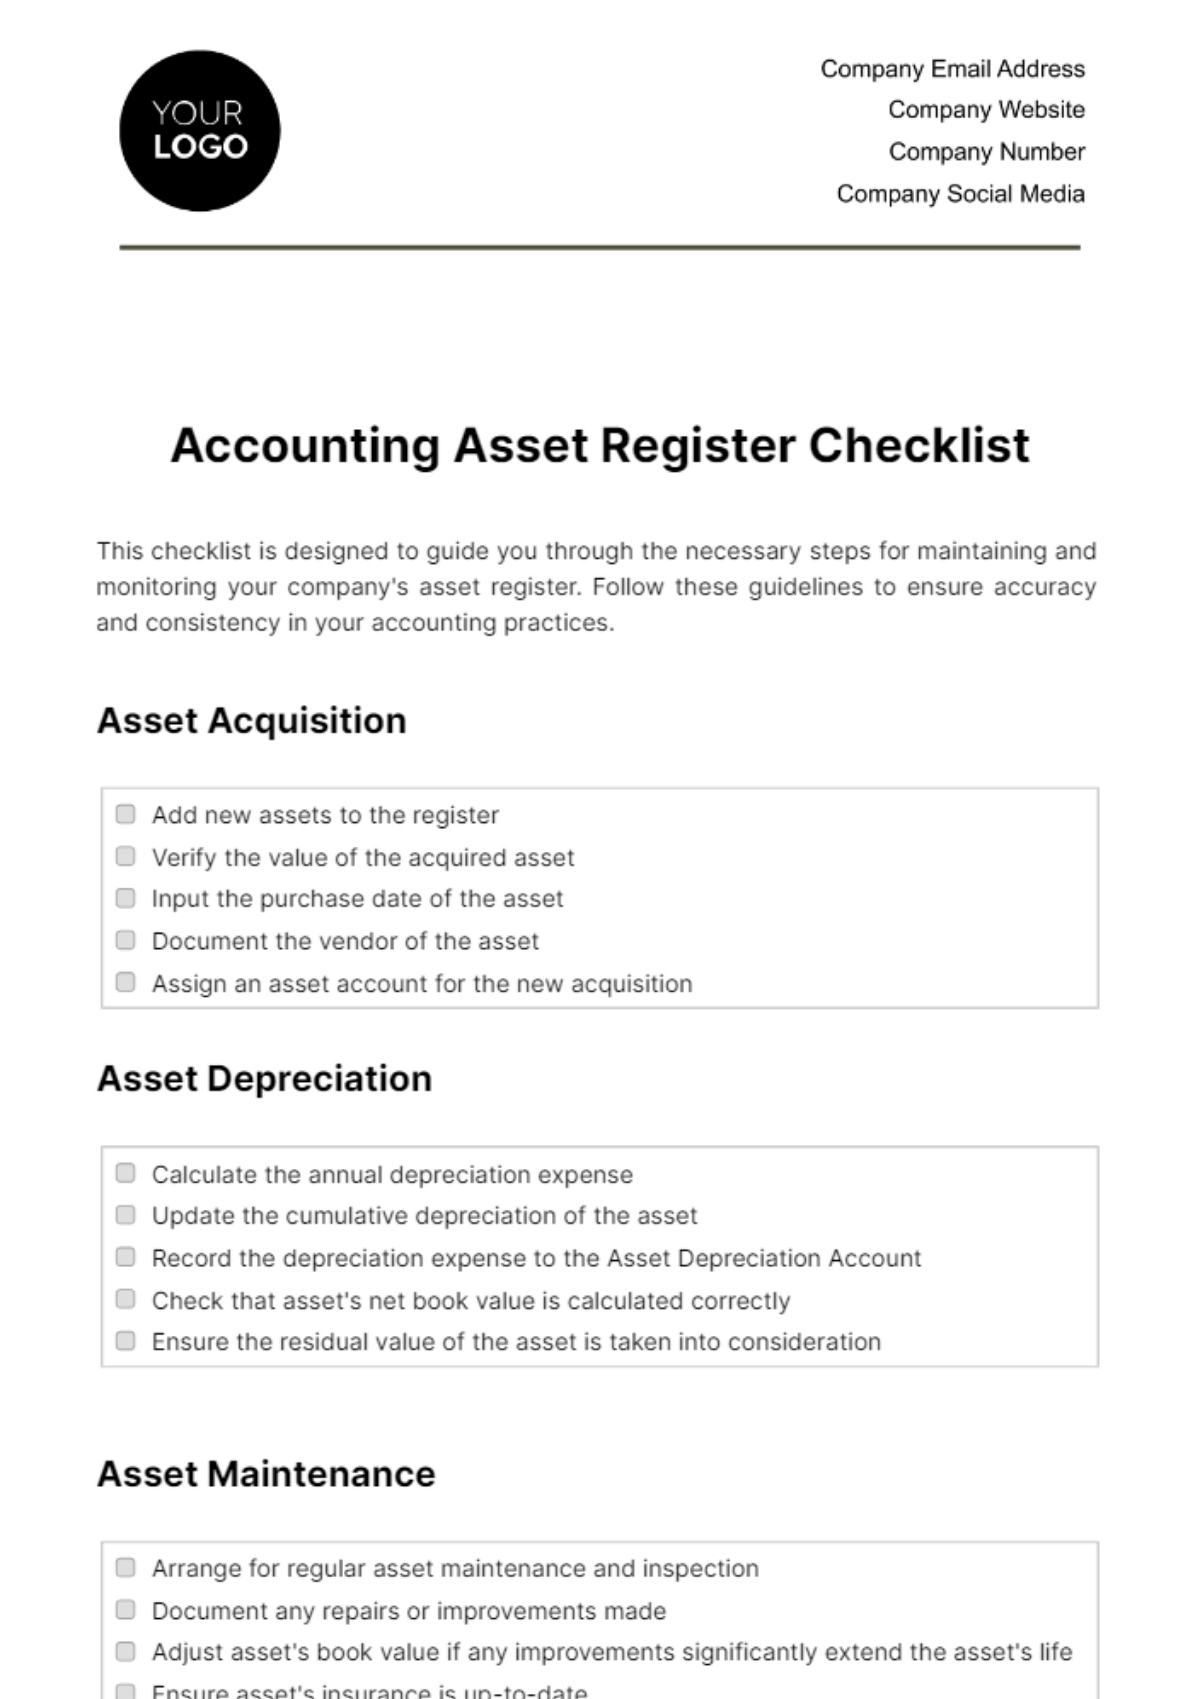 Free Accounting Asset Register Checklist Template